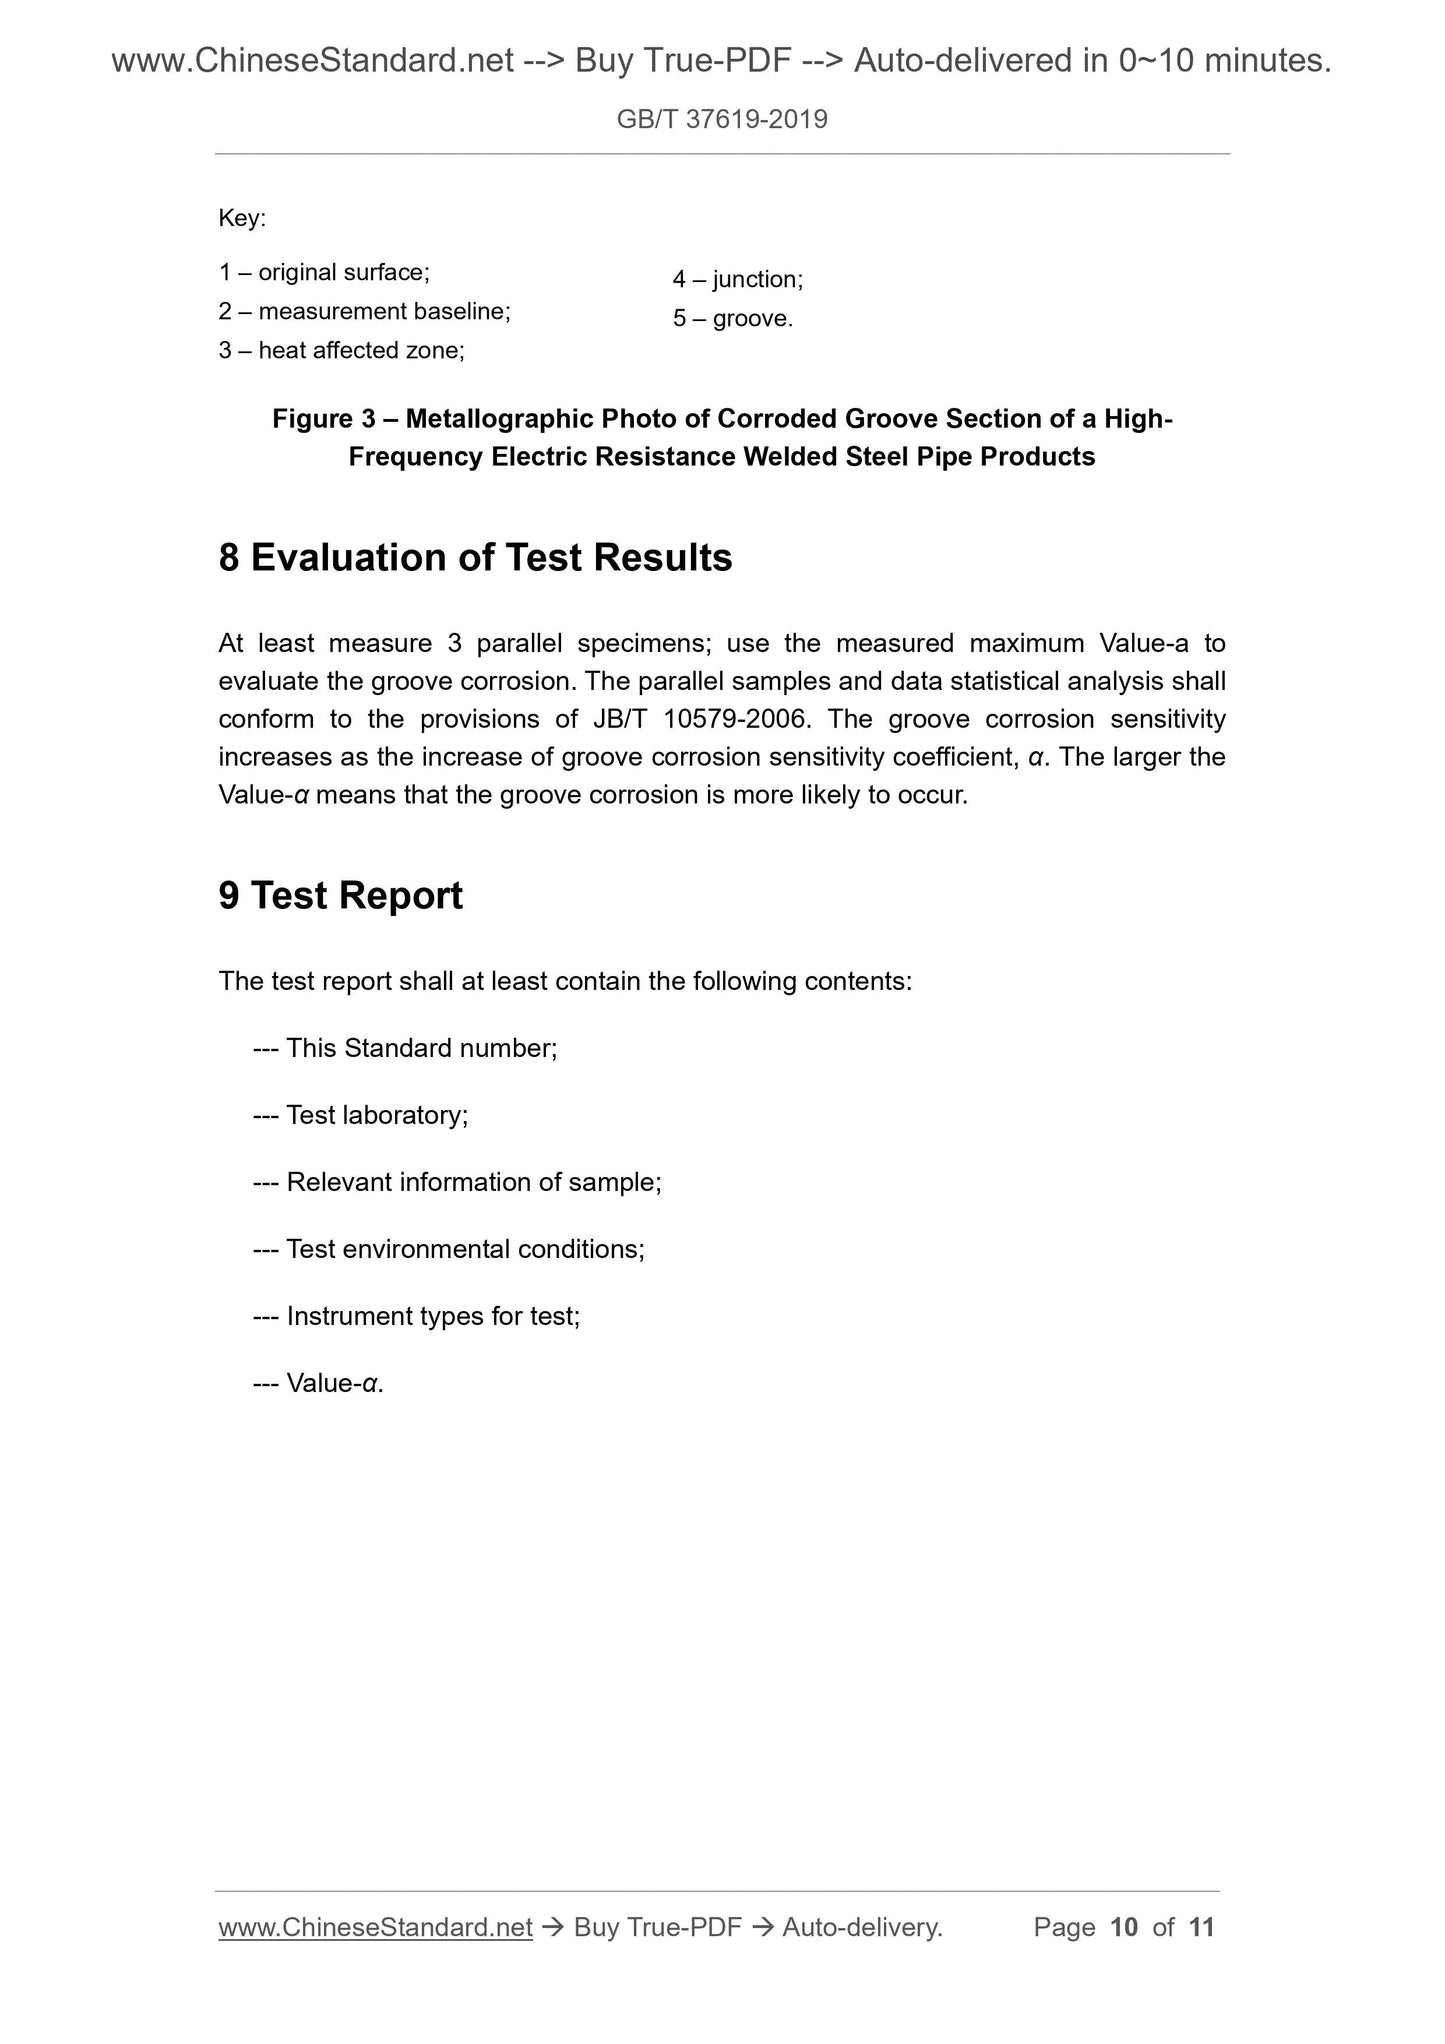 GB/T 37619-2019 Page 5